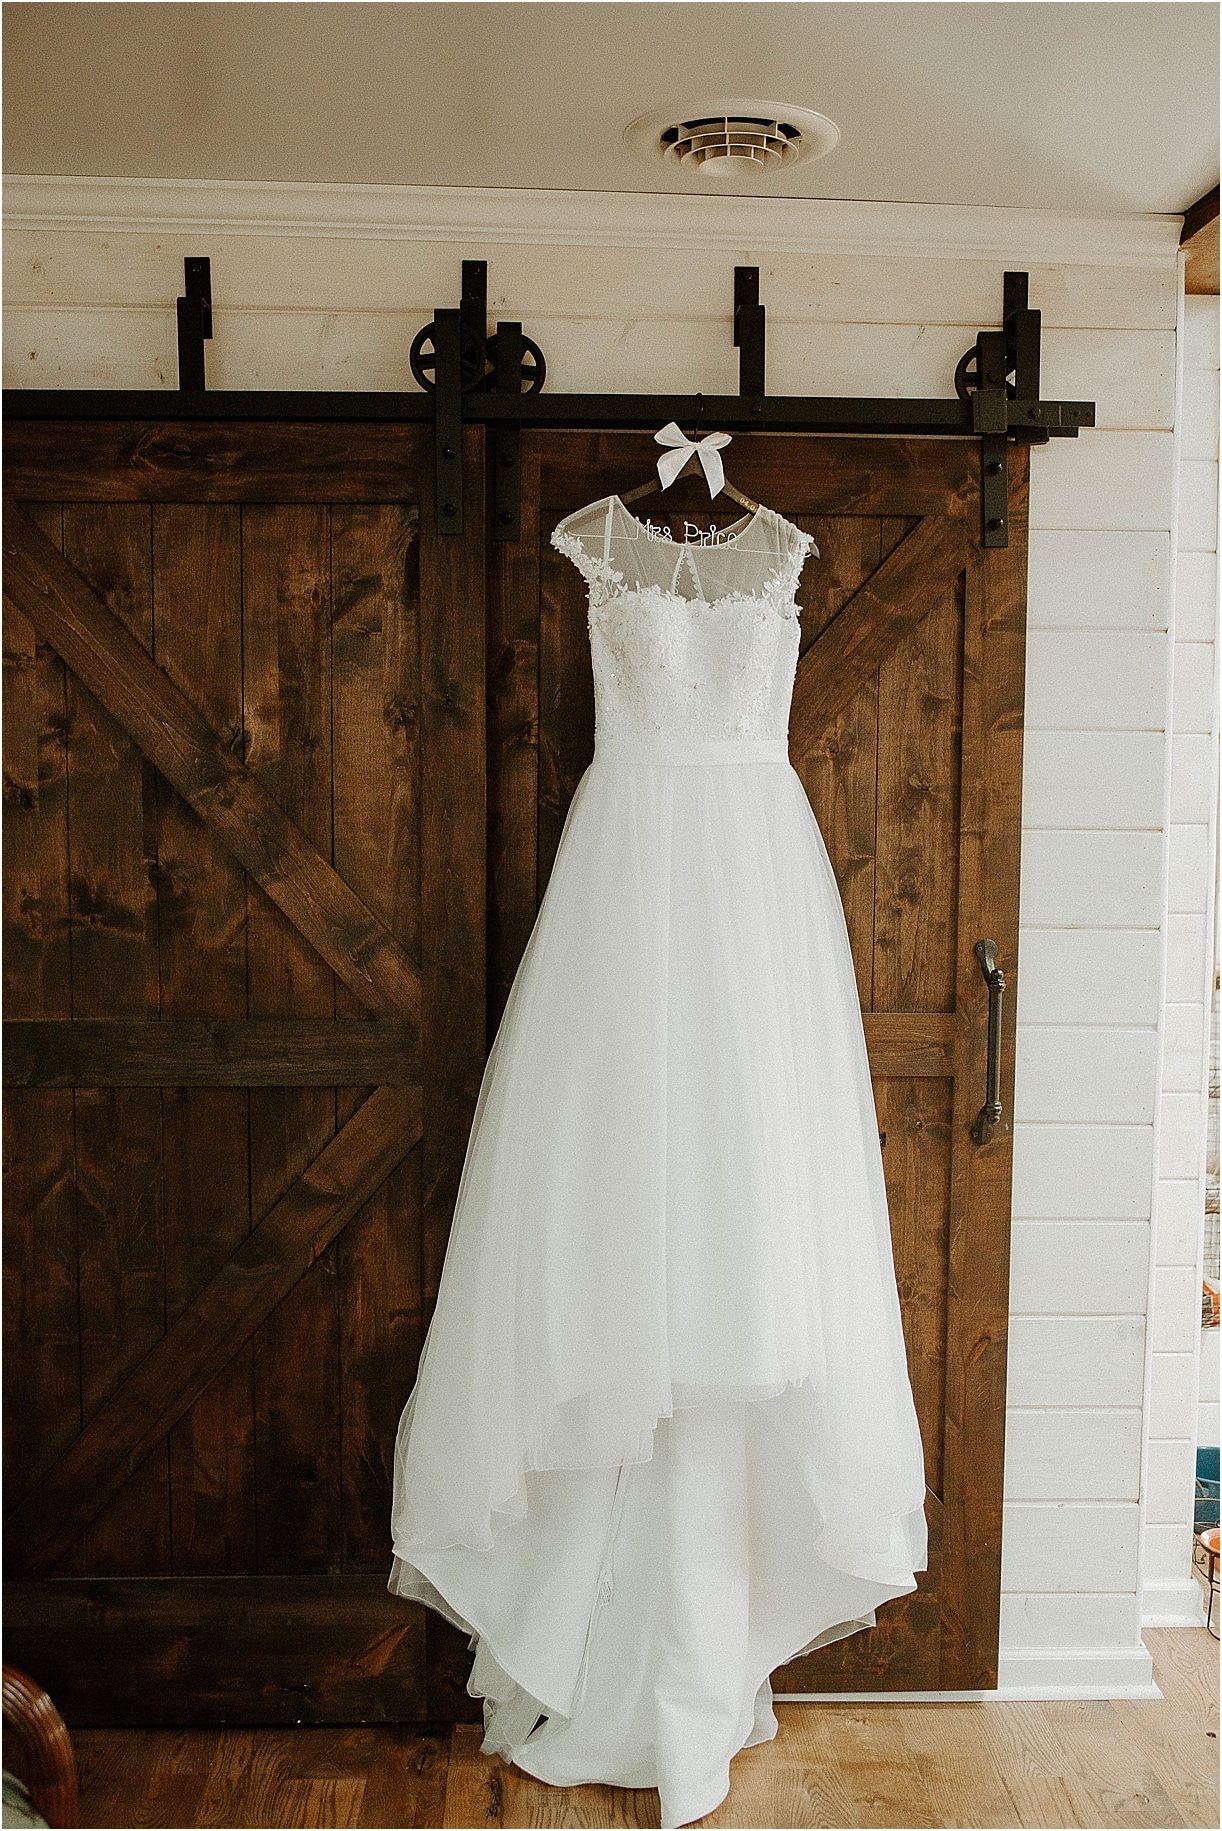 Small Intimate Wedding During Coronavirus What to Do COVID 19 | Hill City Bride Virginia Weddings Gown Dress